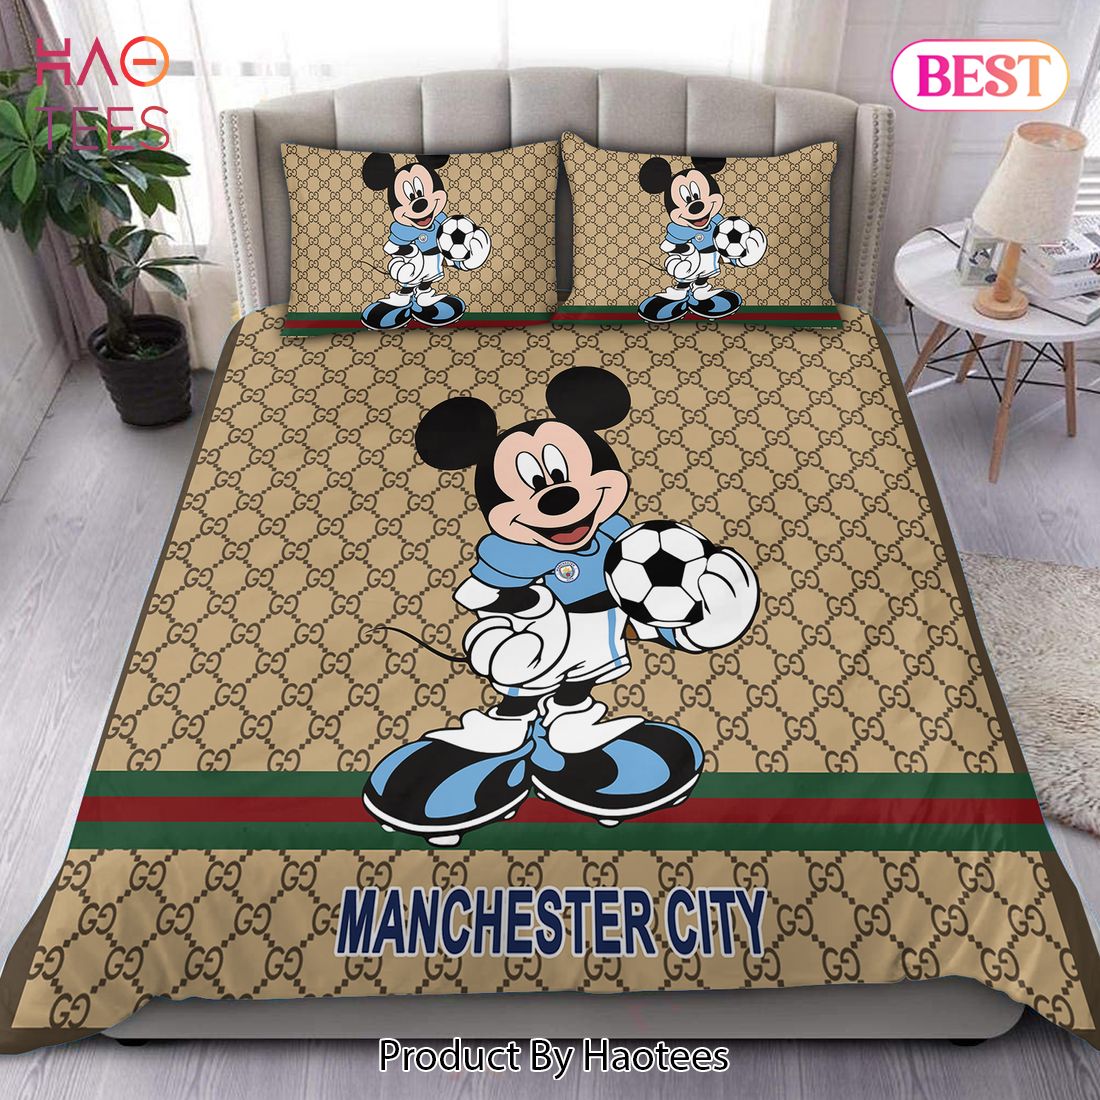 Man City Gucci Mickey Bedding Set Duvet Cover Bedroom Sets Luxury Brand Bedding New Fashion